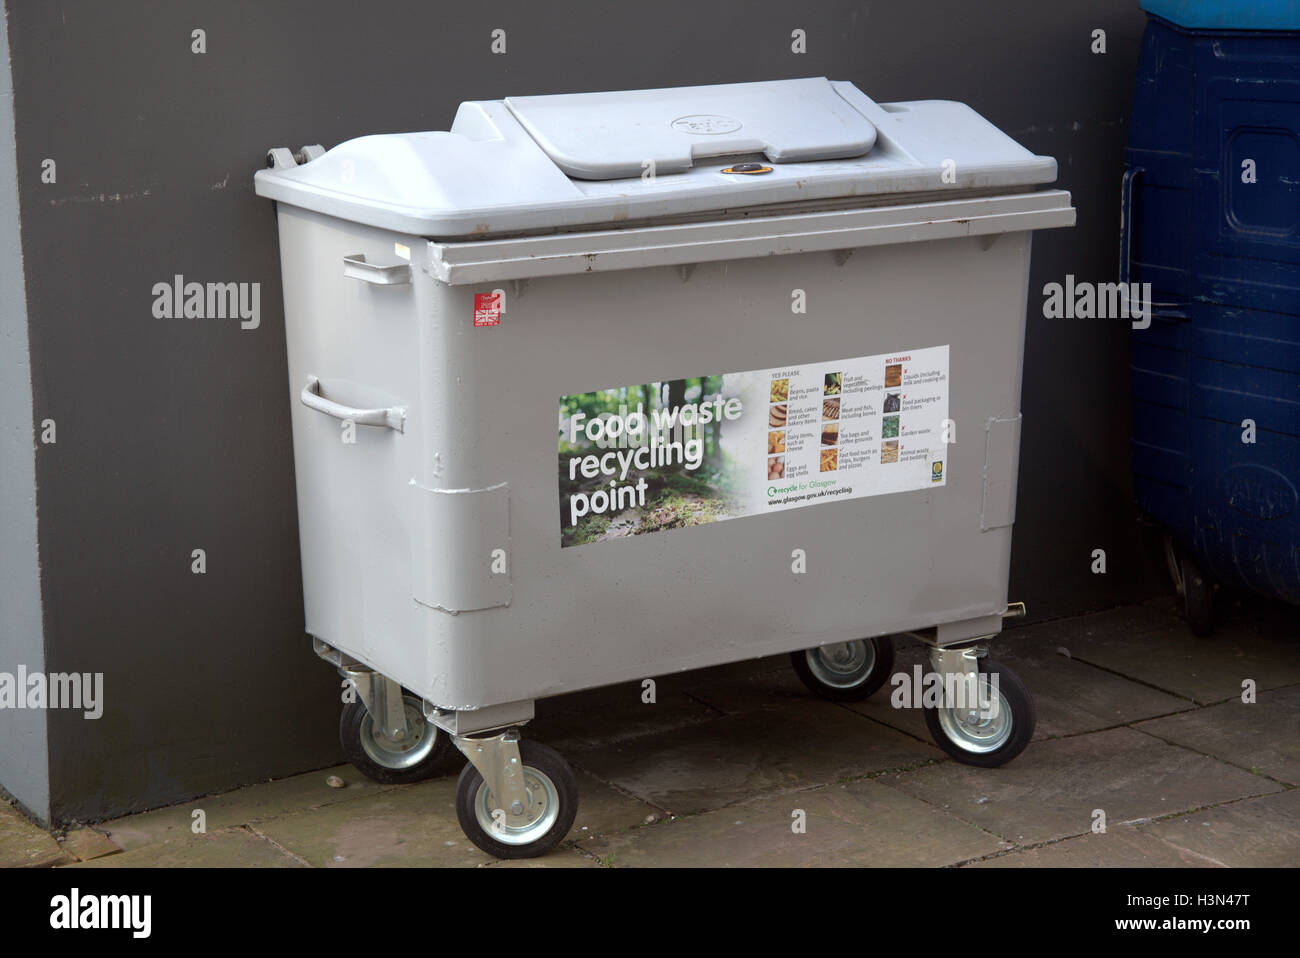 Food recycling dumpster or bin for organic waste from glasgow district council residents in glasgow city Stock Photo